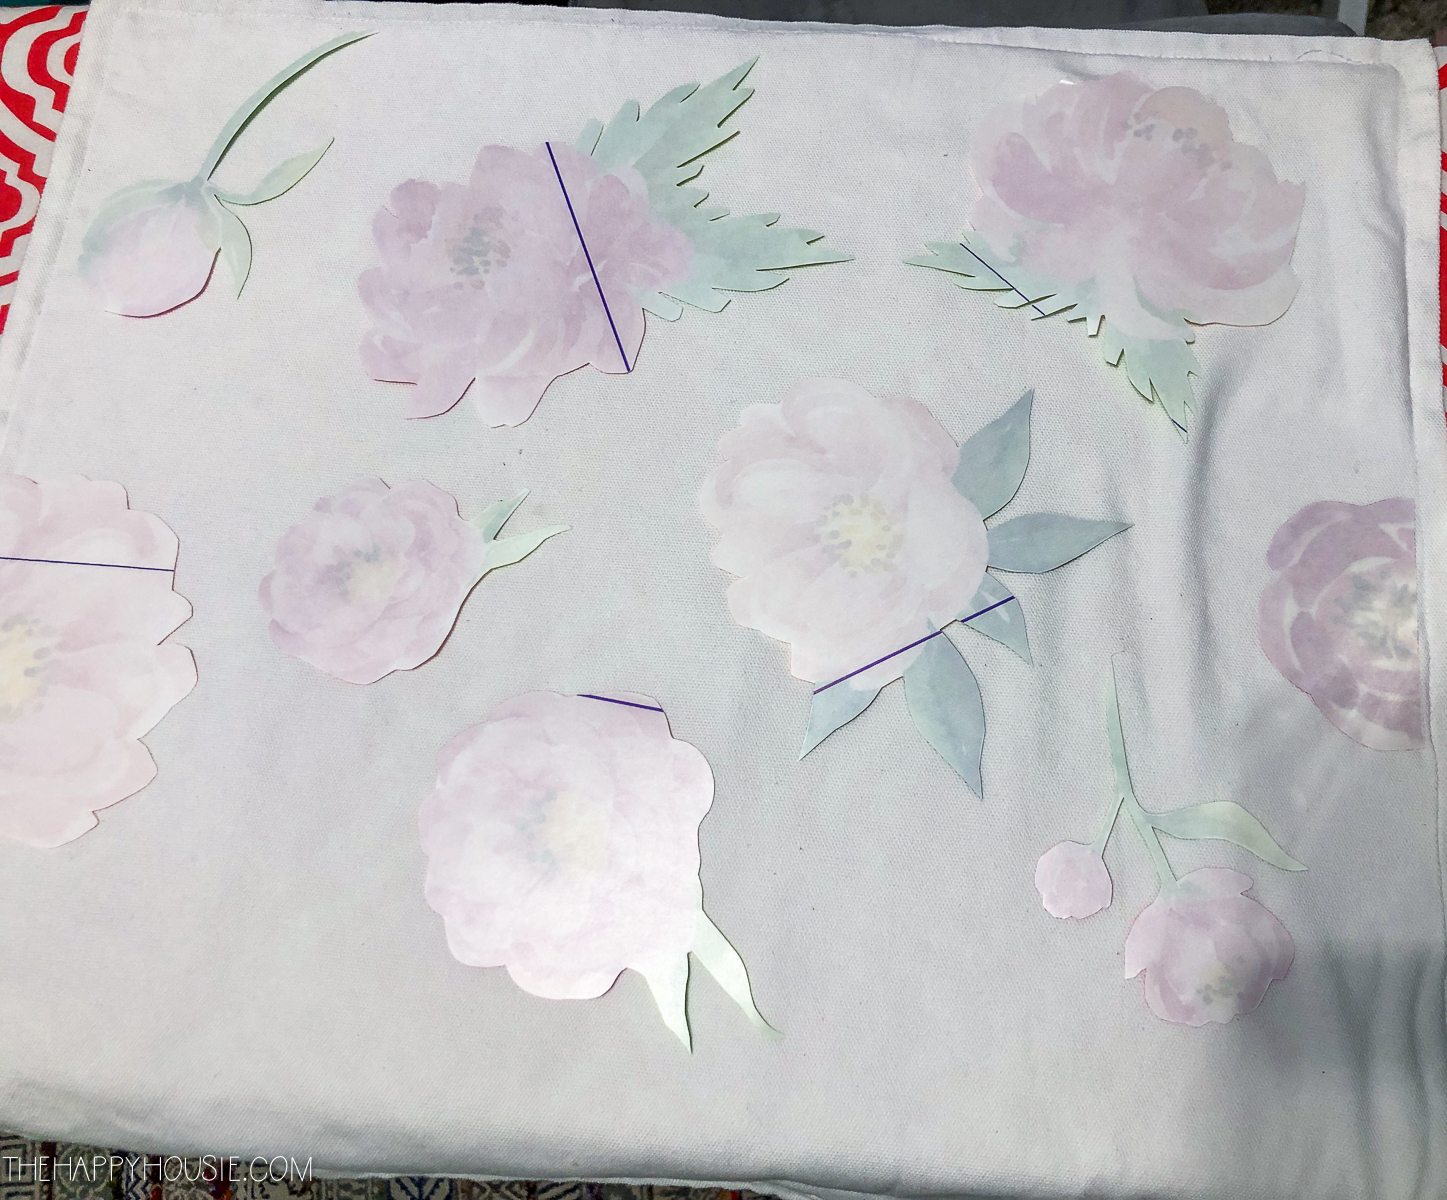 All the cutout flowers on the pillow case.